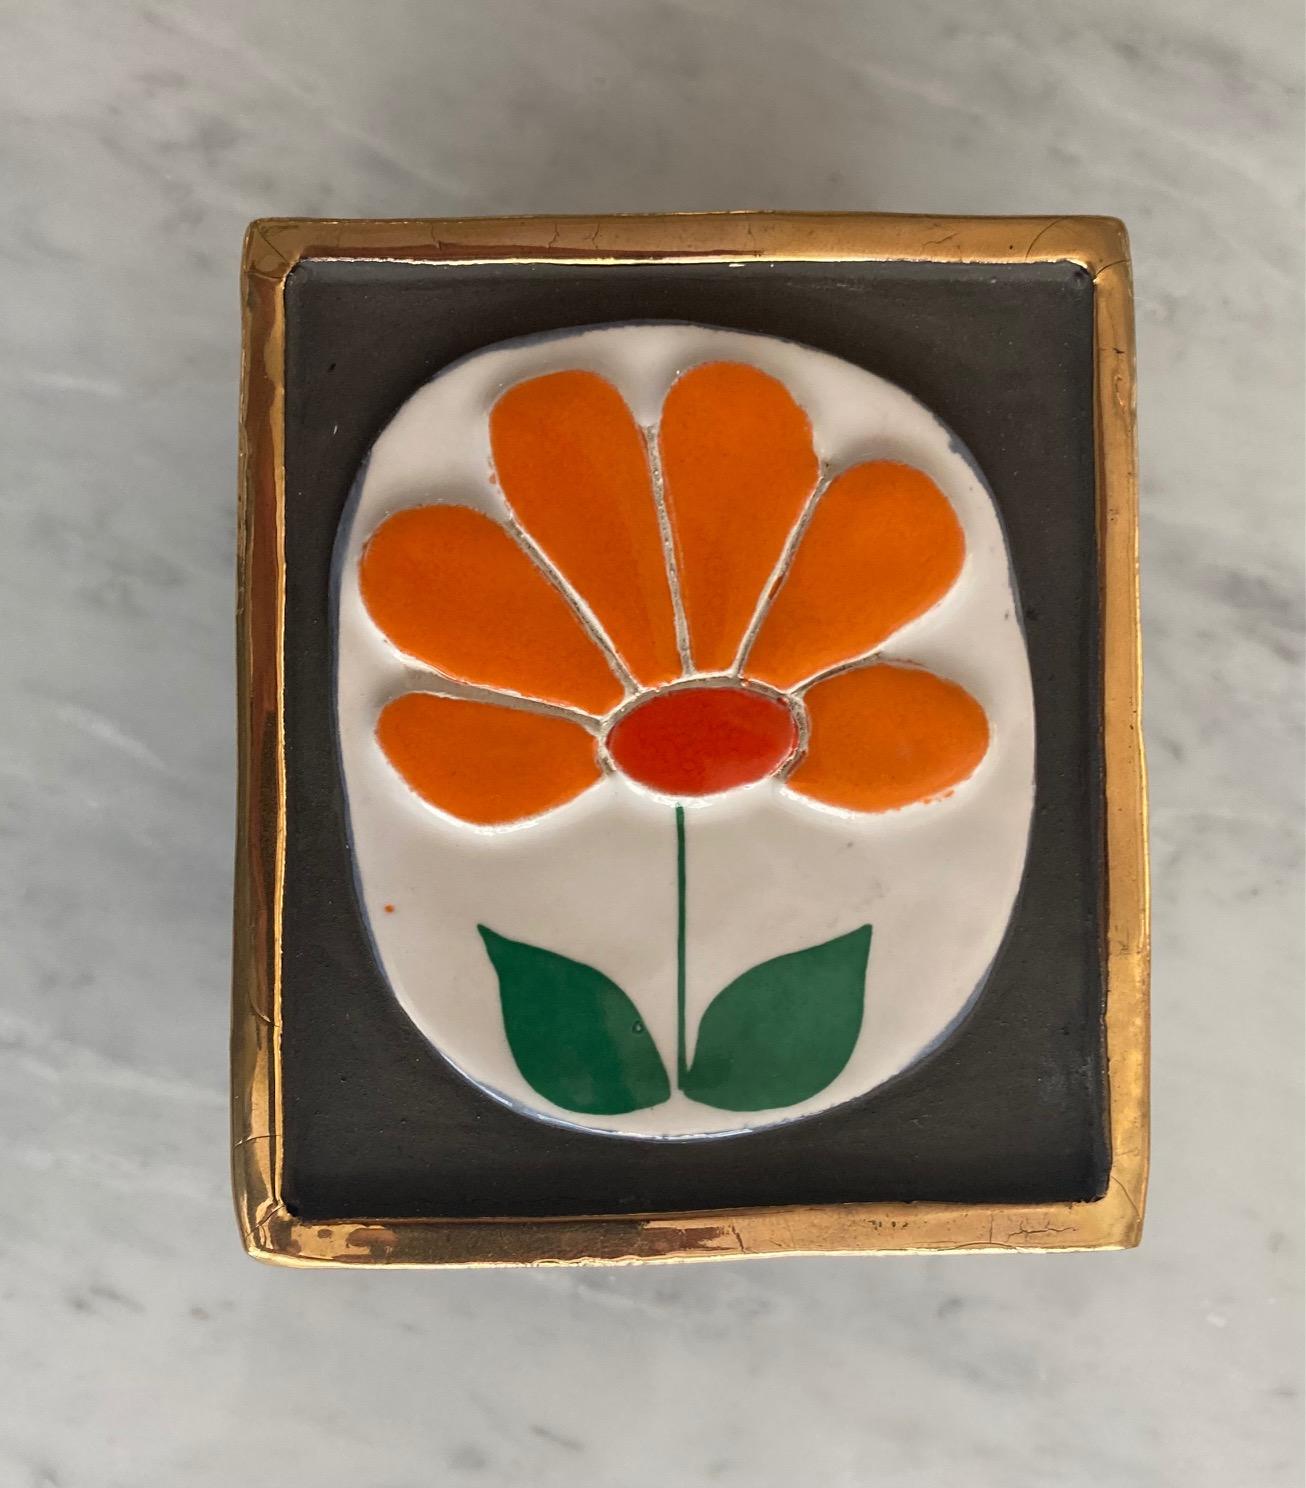 Box by Mithé Espelt; wooden base and ceramic top with flower motive and gilded edges.

Original green felt at the back of the box and of the top.

France circa 1970

This poetic work of art demonstrates Mithé Espelt's talent for design and her